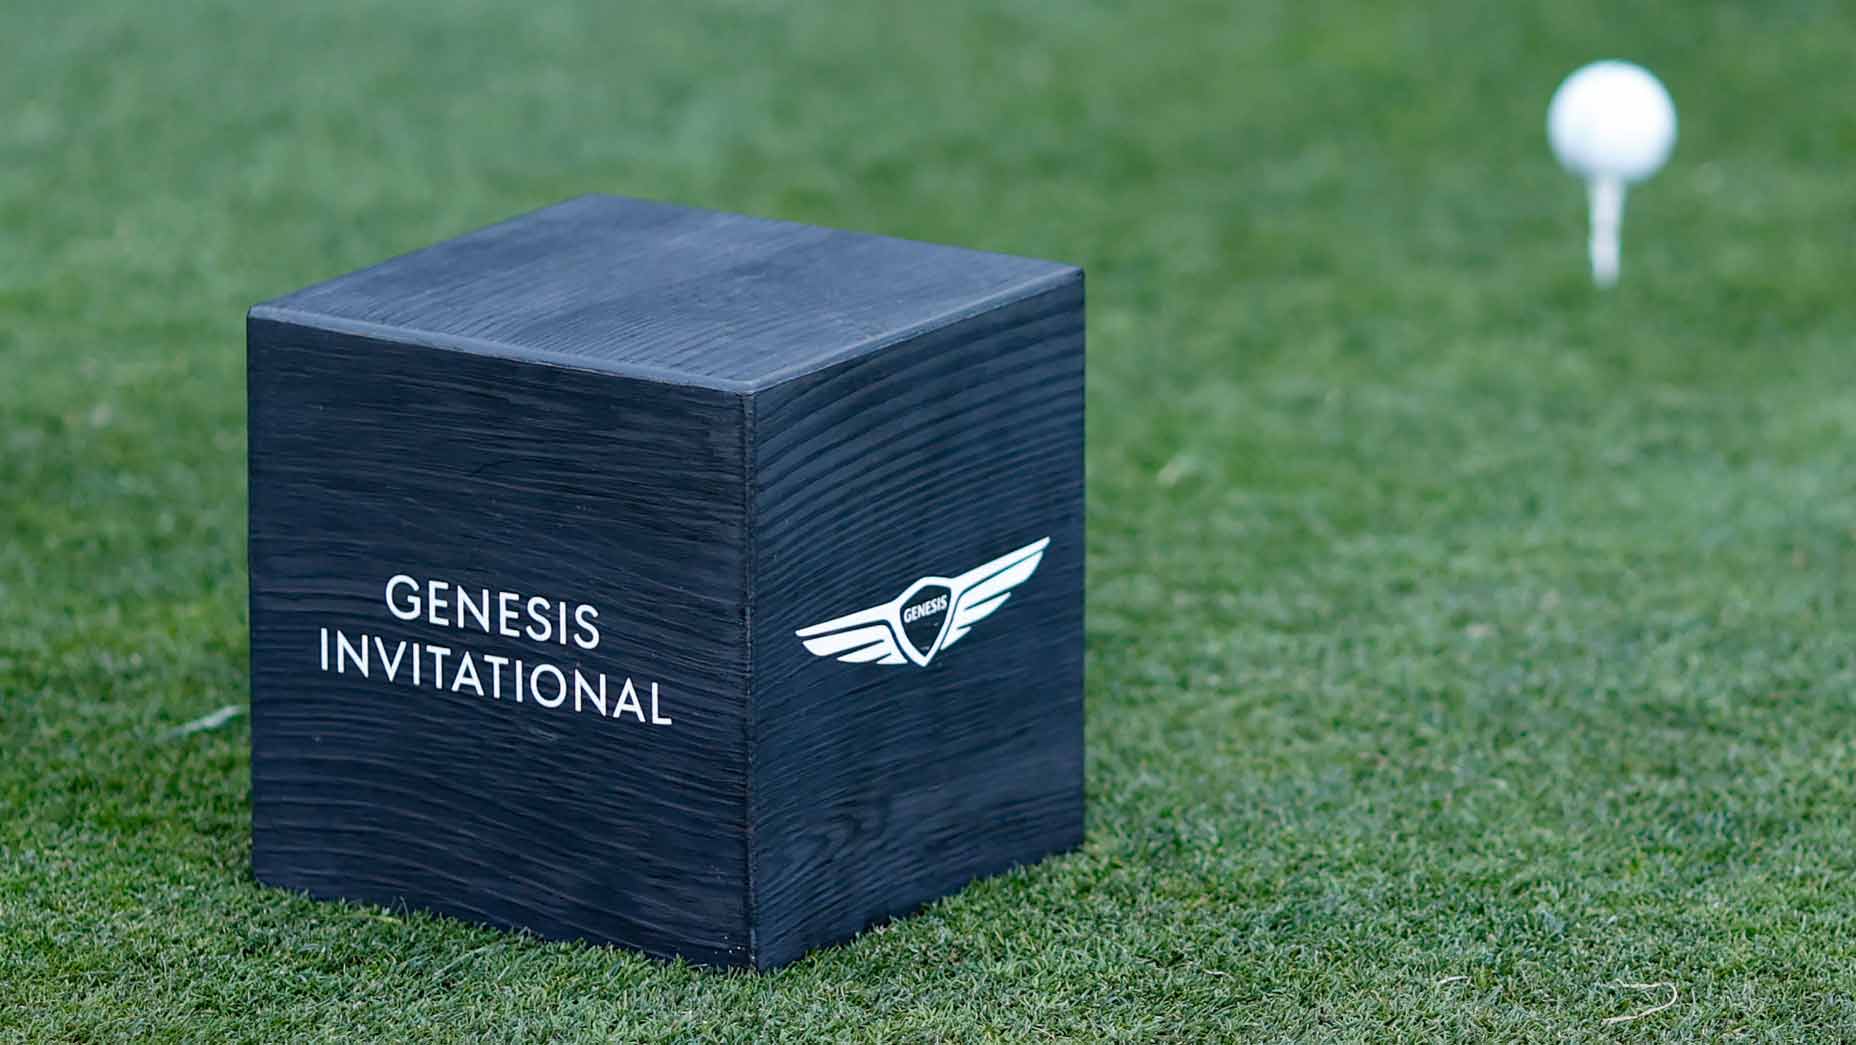 A tee marker and teed up golf ball pictured on grass at Genesis Invitational